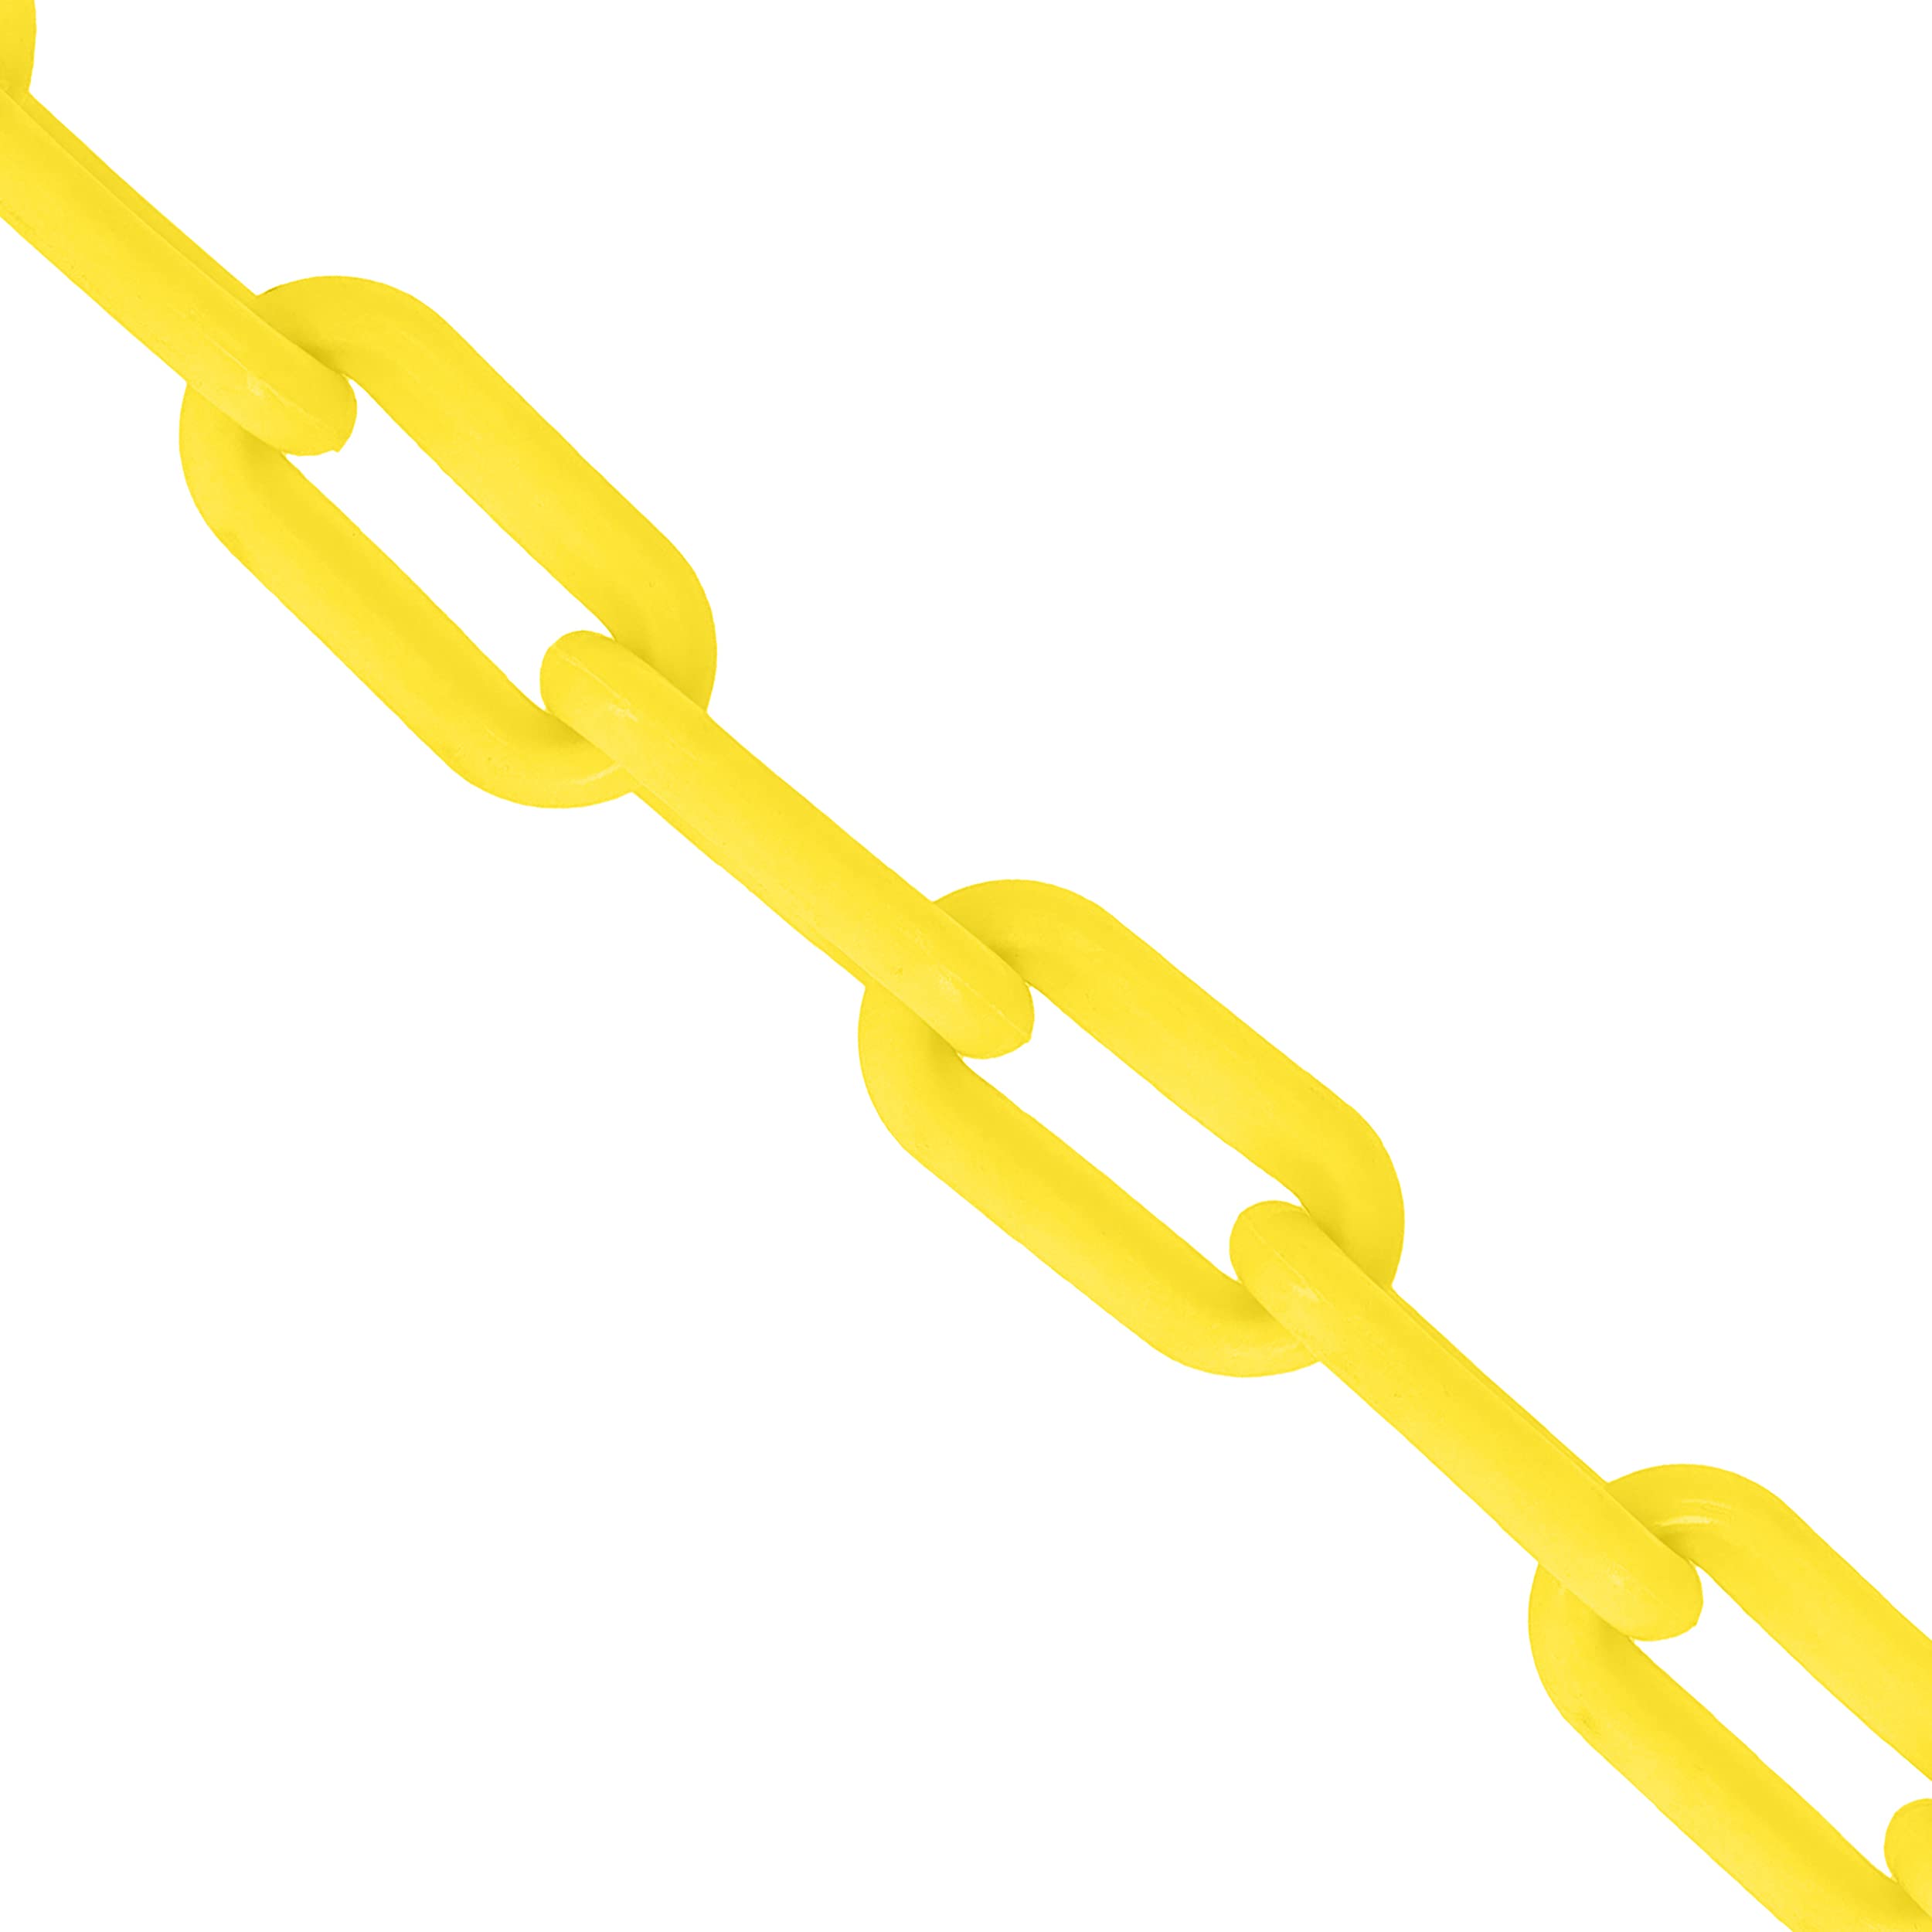 BISupply Yellow Plastic Chain Links - 125ft x 2in Plastic Barrier Chain for Safety Crowd Control or Plastic Links Halloween Decor Chains for Costumes